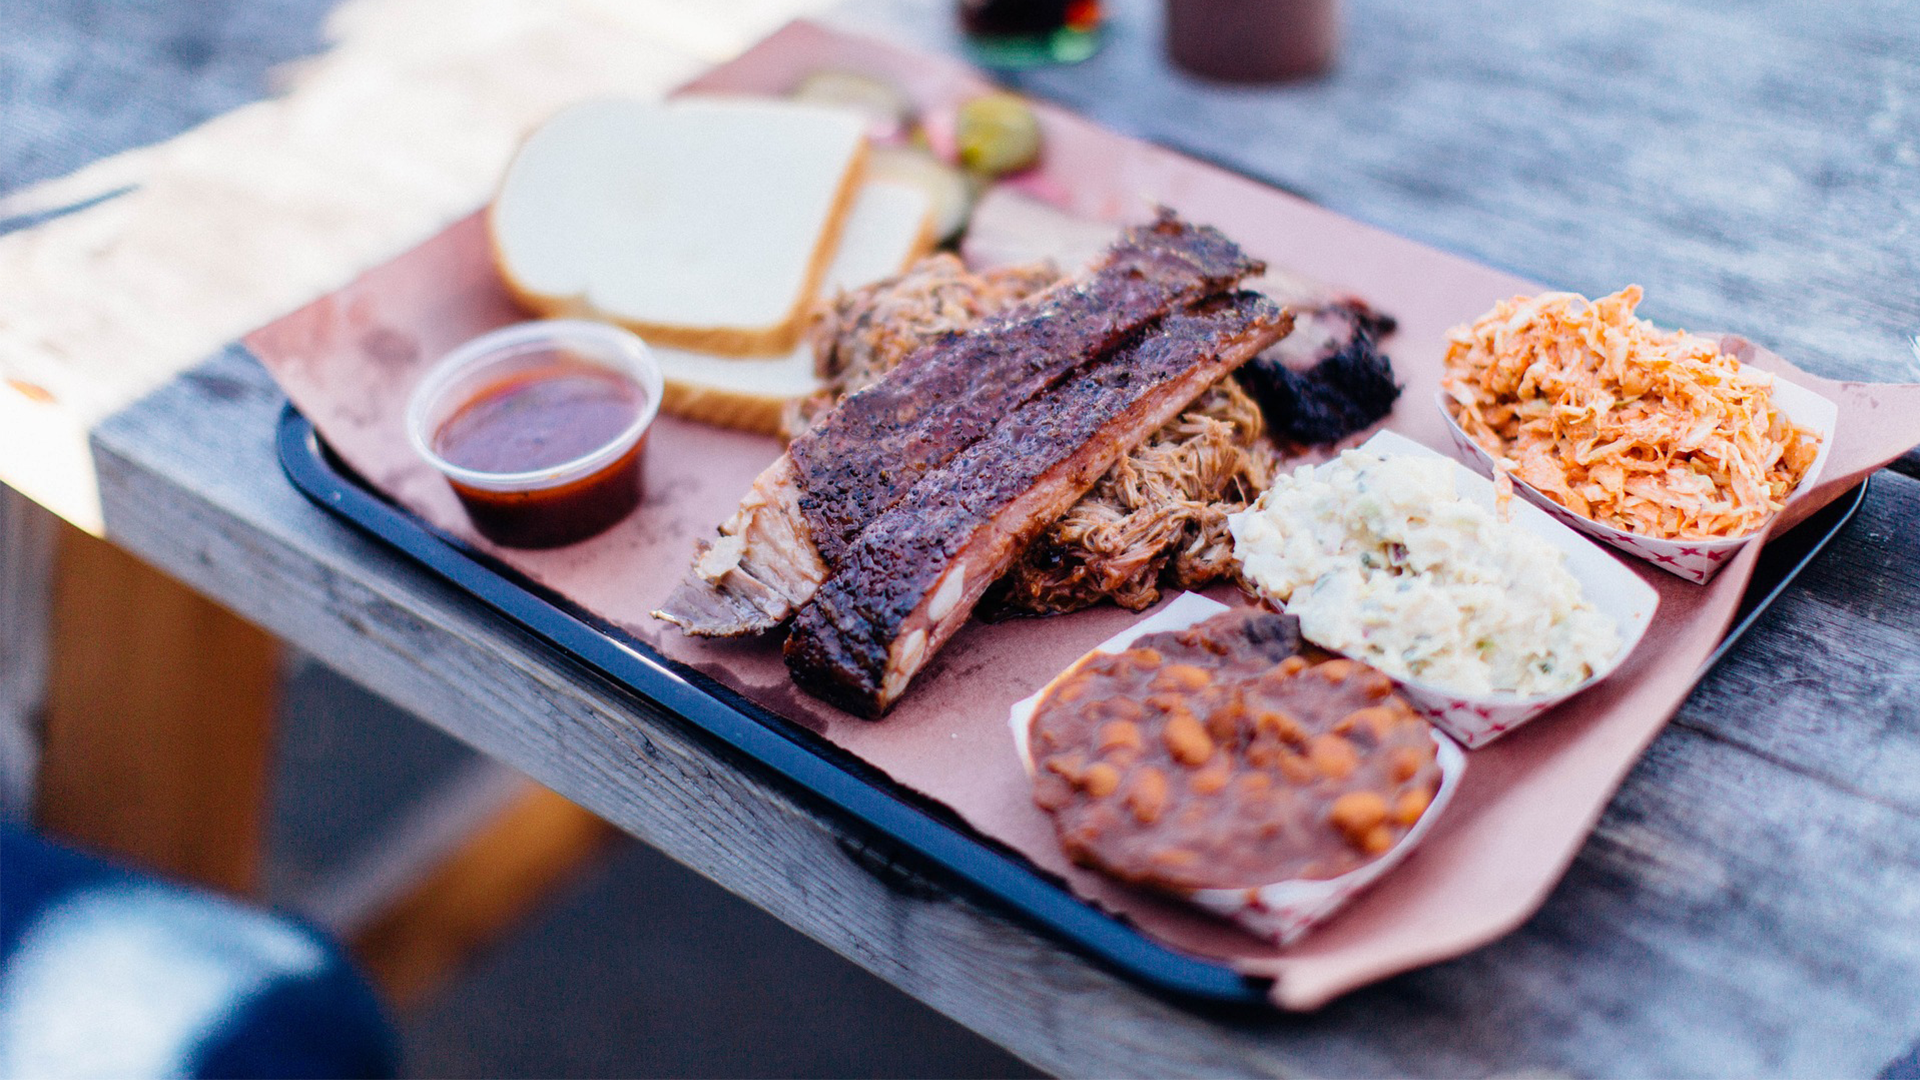 A tray with a barbecue meal for lunch.